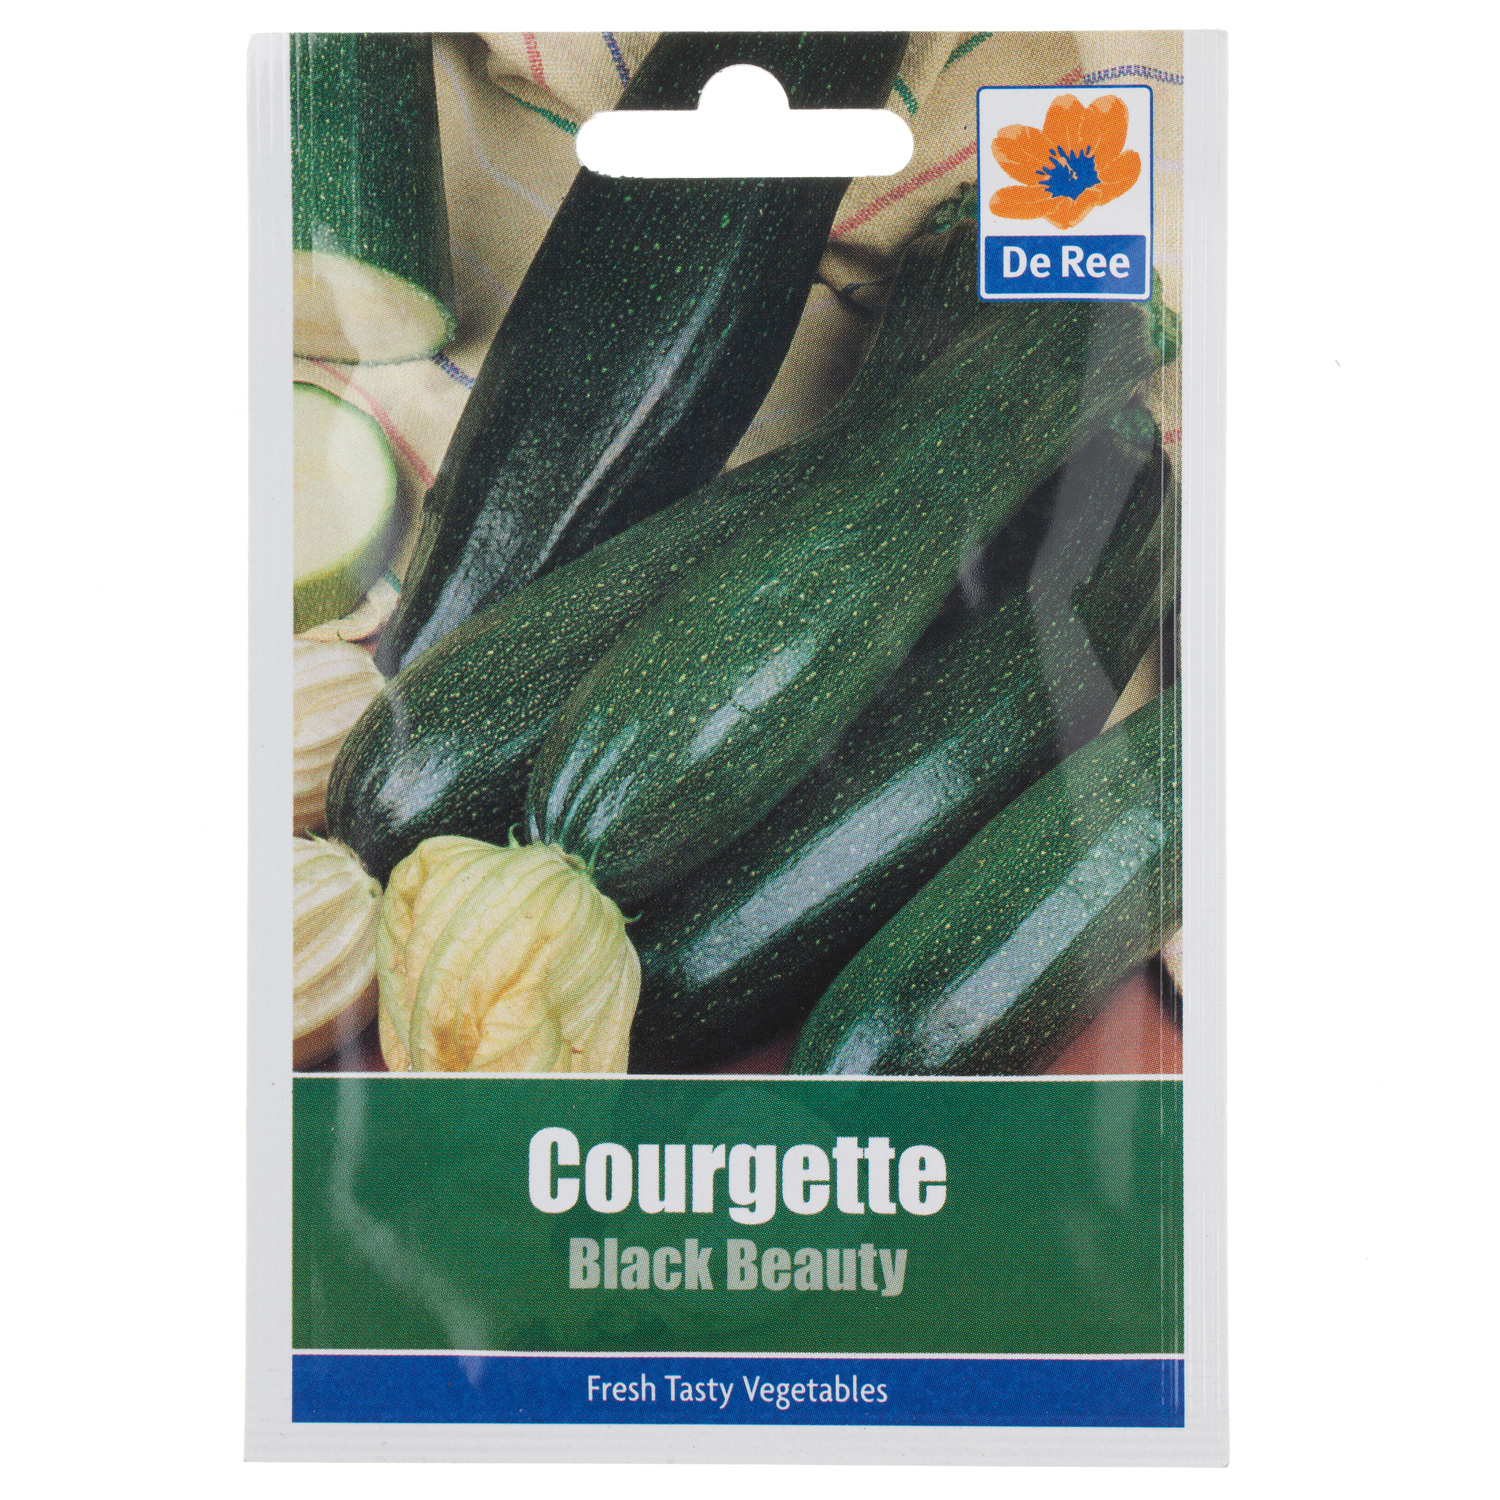 Courgette Black Beauty Seed Packet Image